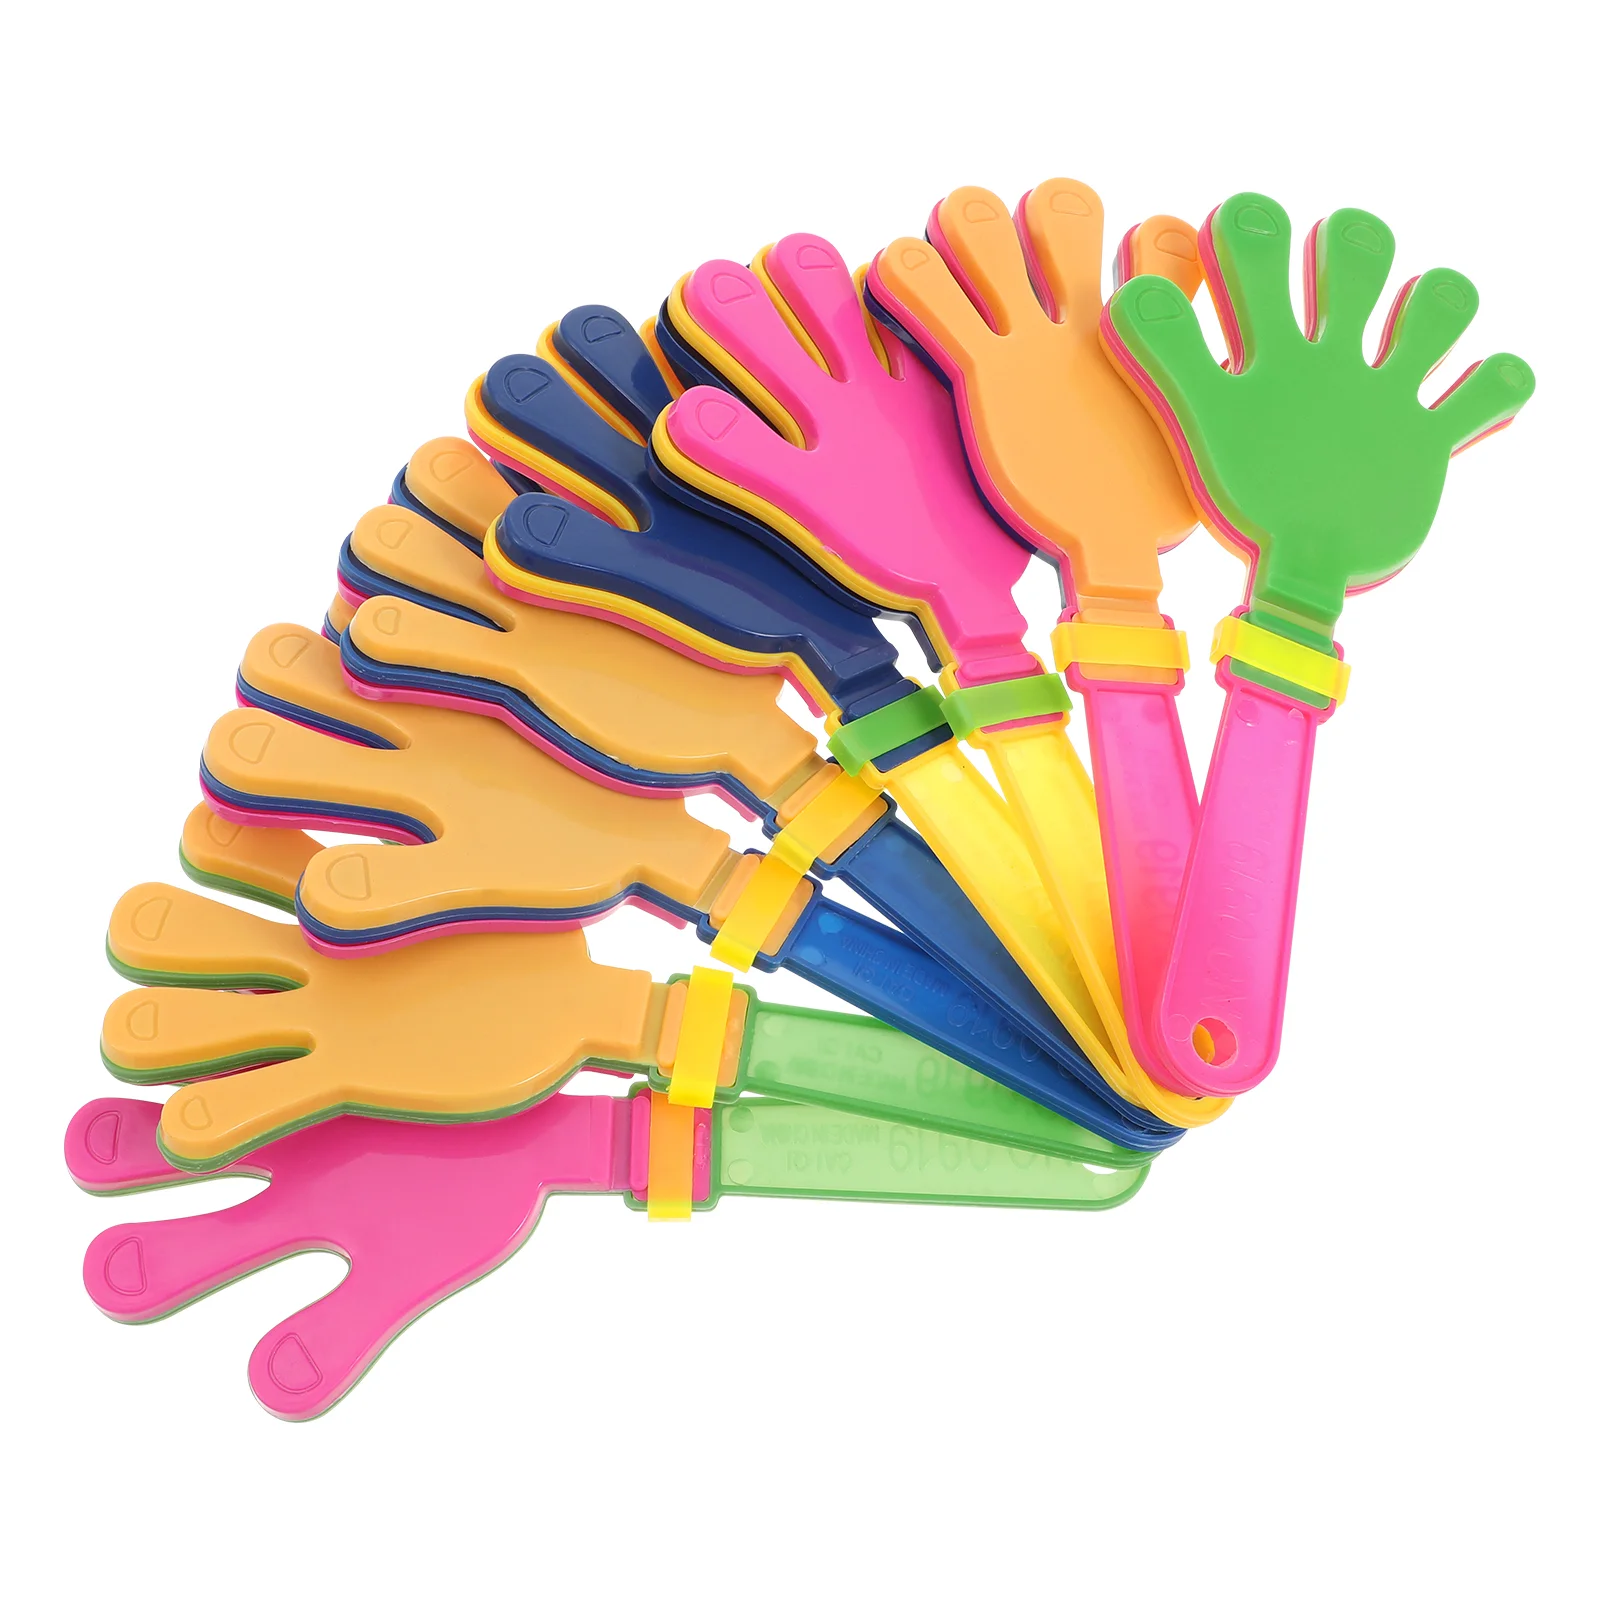 

24 Pcs Clapping Toy Hand Clapper Gifts Clappers Toys Party Favors Noise Makers Noisemakers for Sports